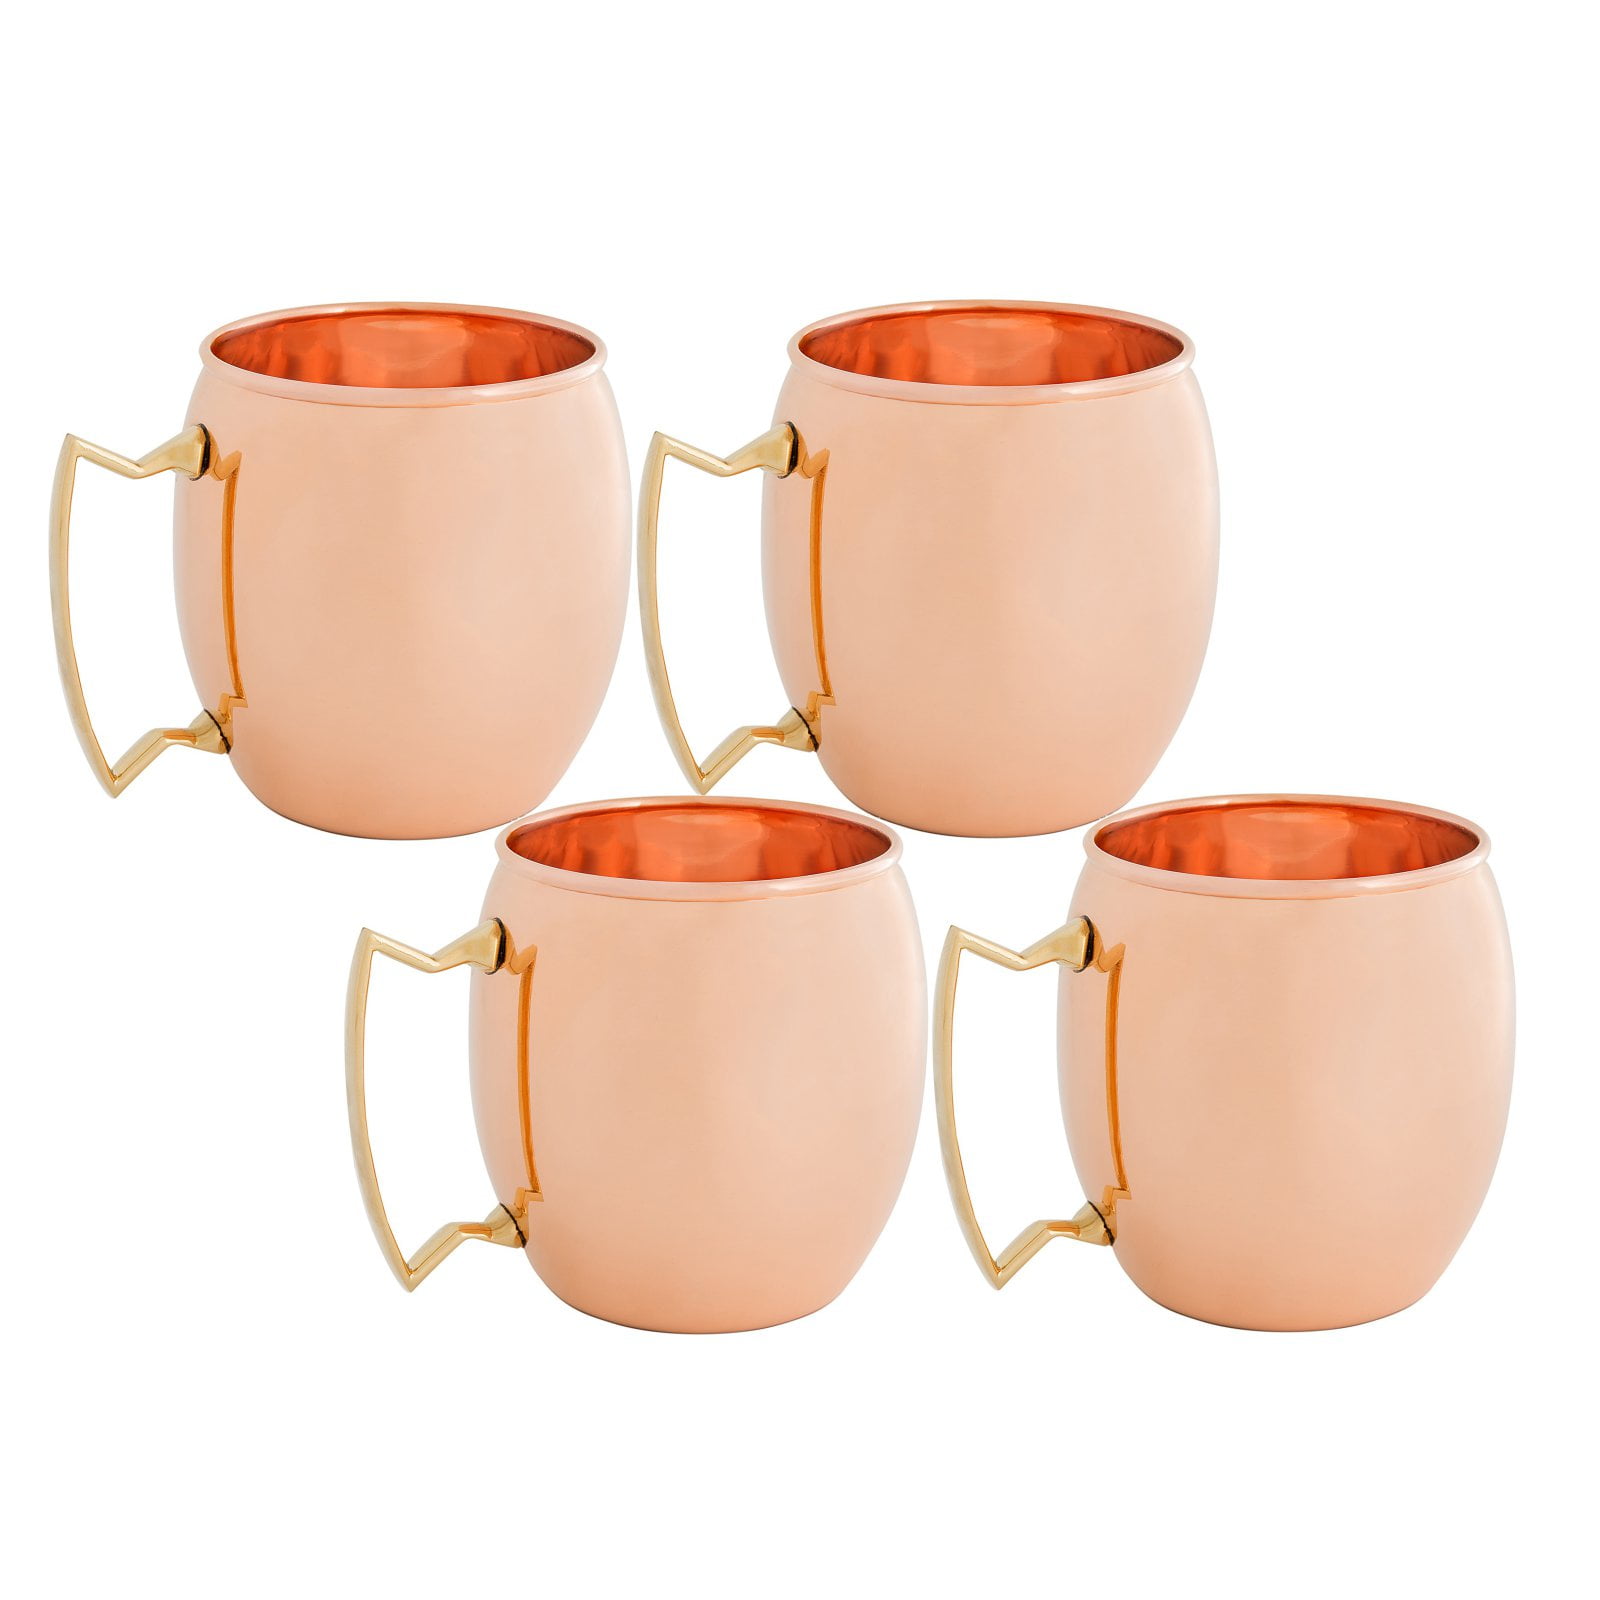 Old Dutch International Solid Moscow Mule Mug Monogrammed H 16-Ounce Copper Set of 4 